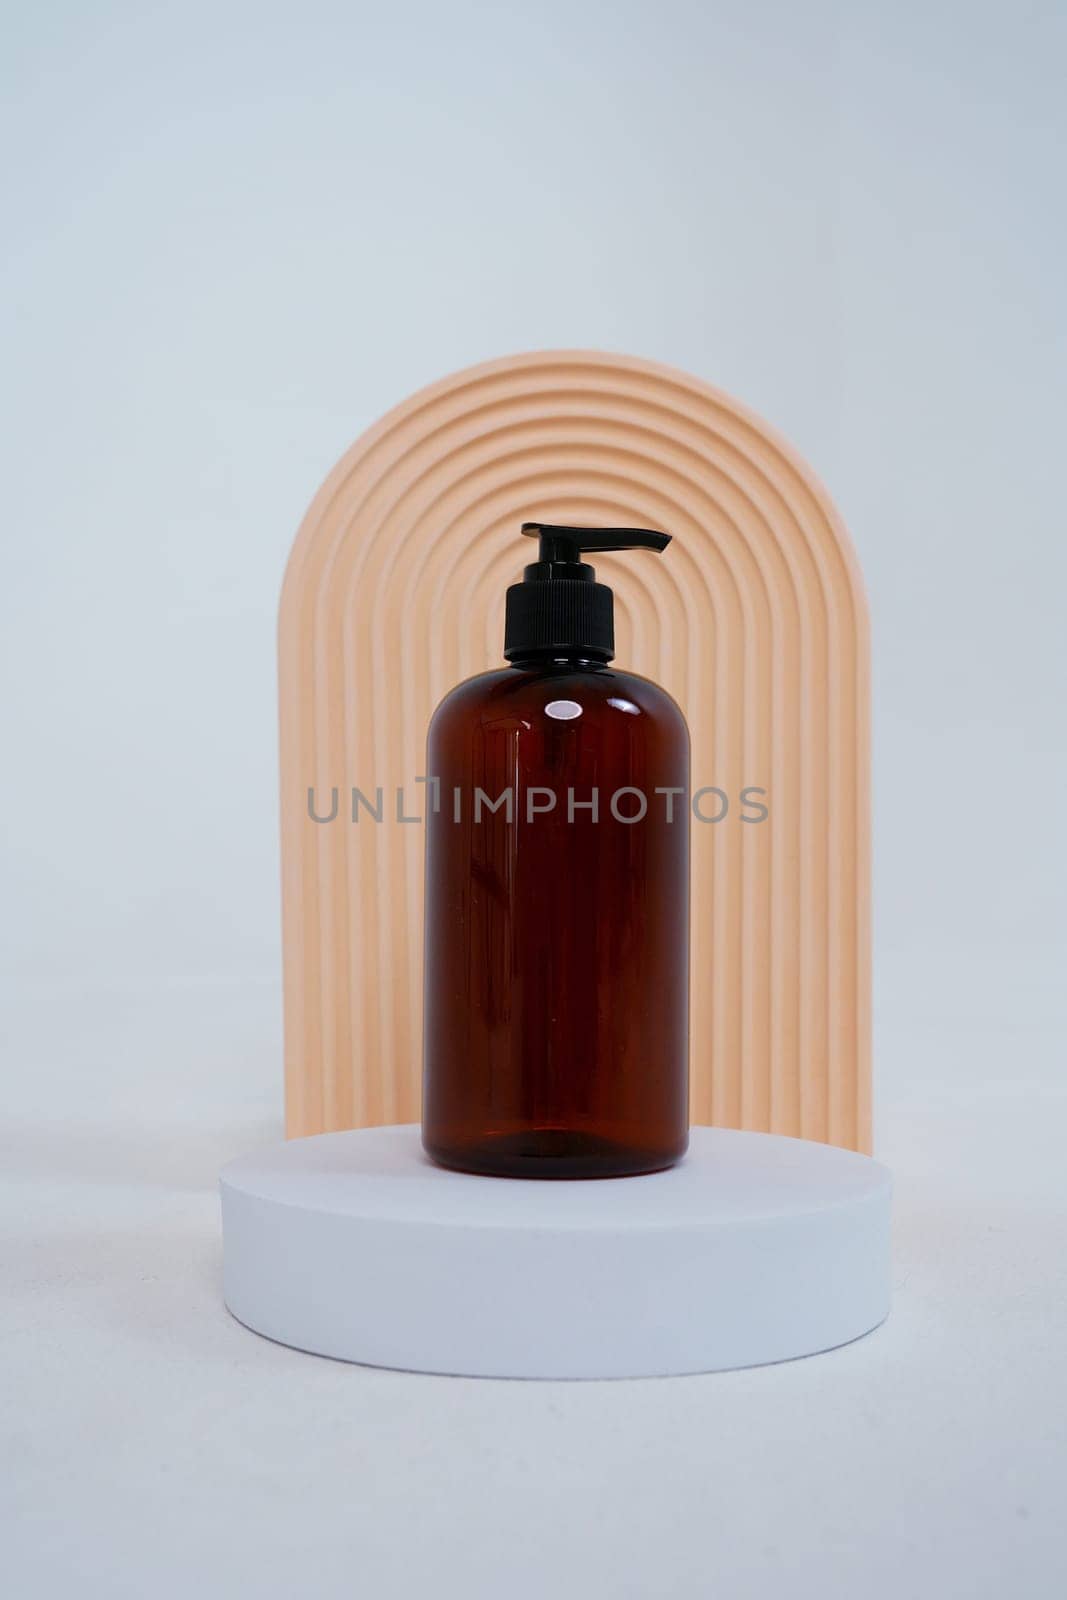 Composition with geometric shapes.body care. bottle with a dispenser, on a light gray background. Advertising concept by tewolf